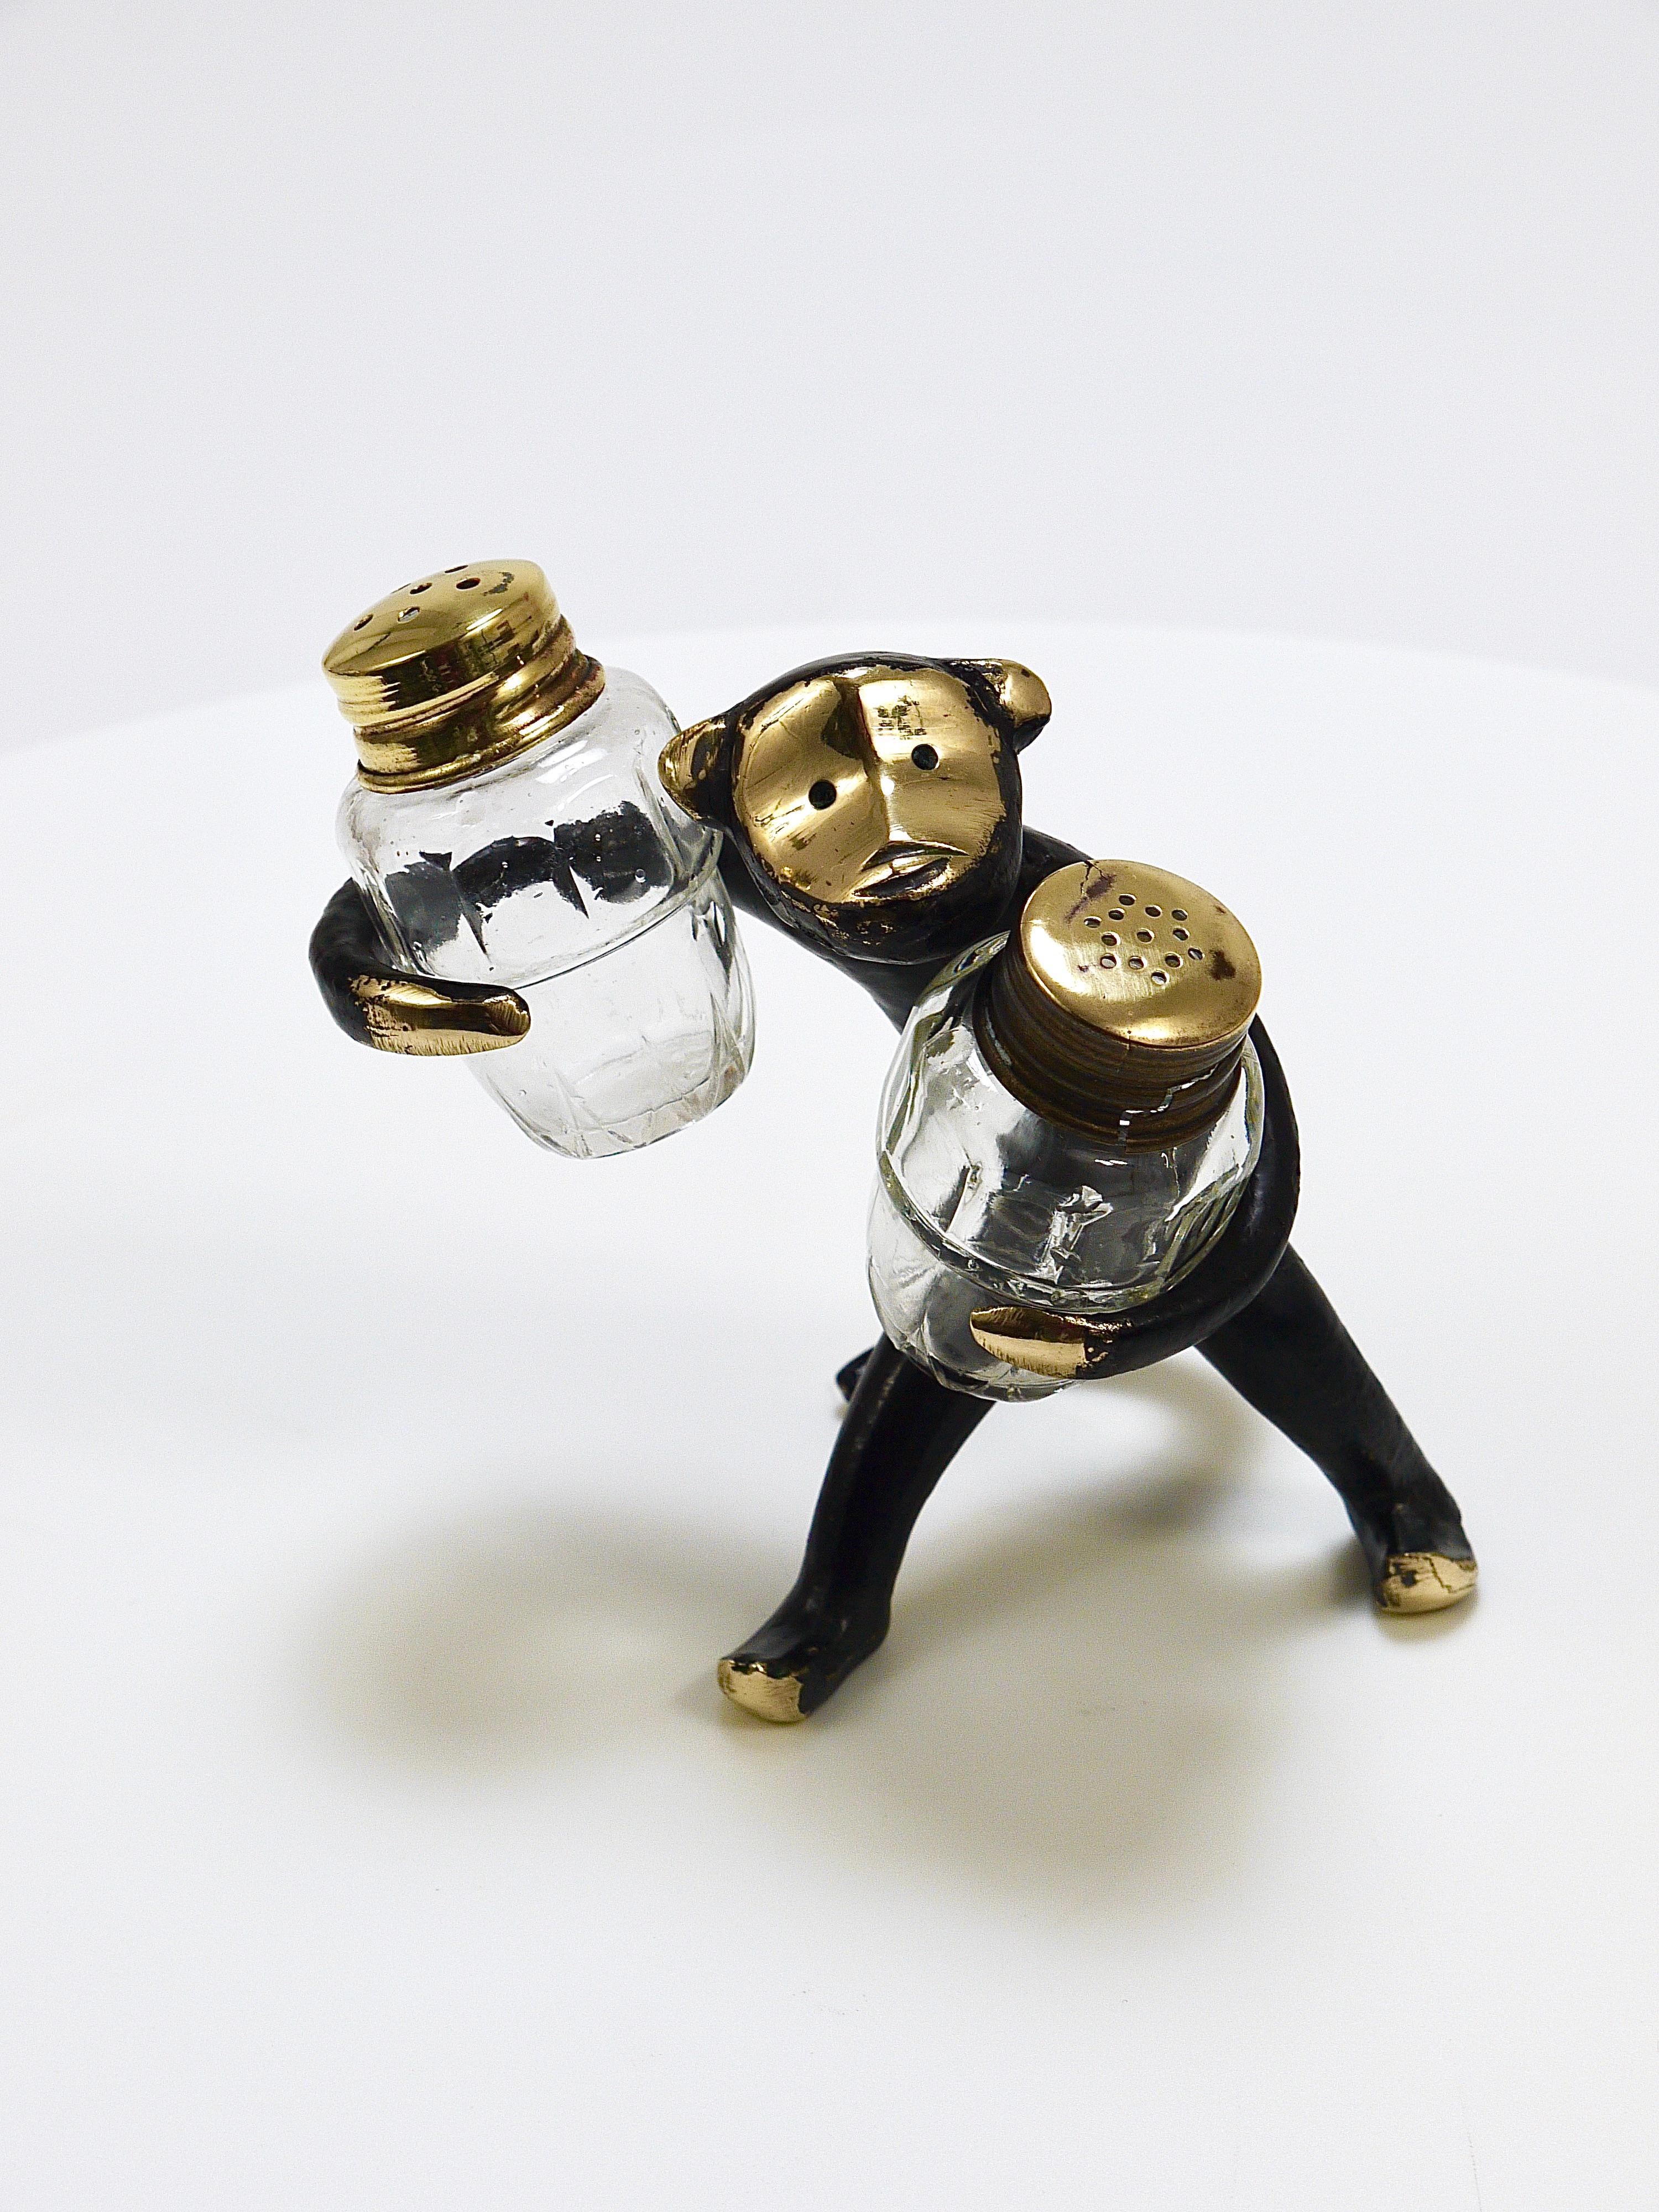 Walter Bosse Monkey Salt and Pepper Shakers Set, Herta Baller, Austria, 1950s In Good Condition For Sale In Vienna, AT